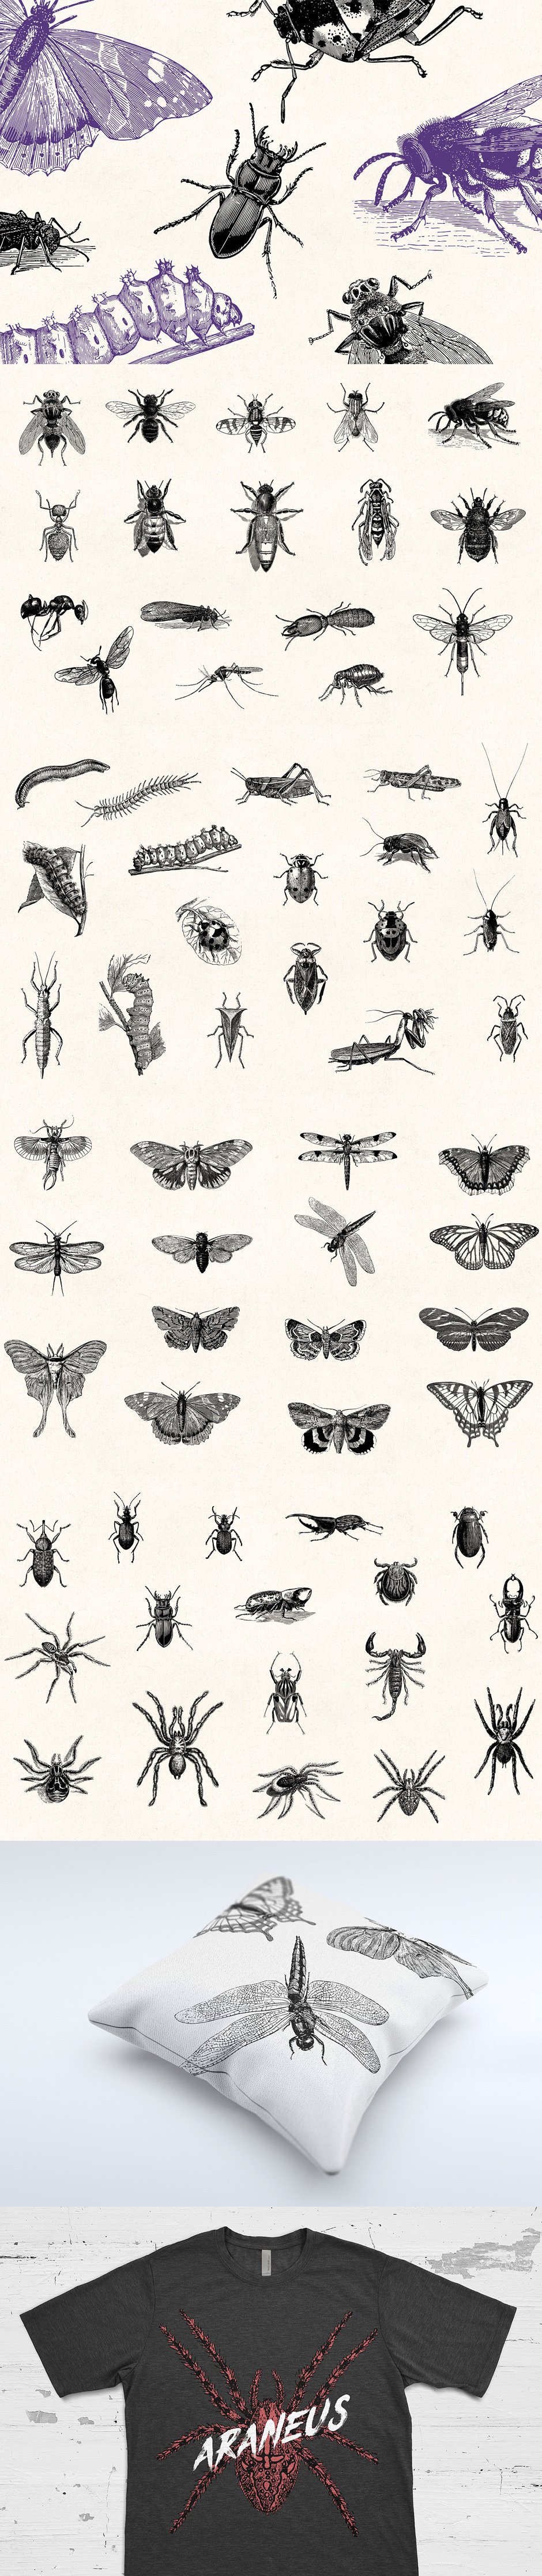 Insects-Vintage-Illustrations